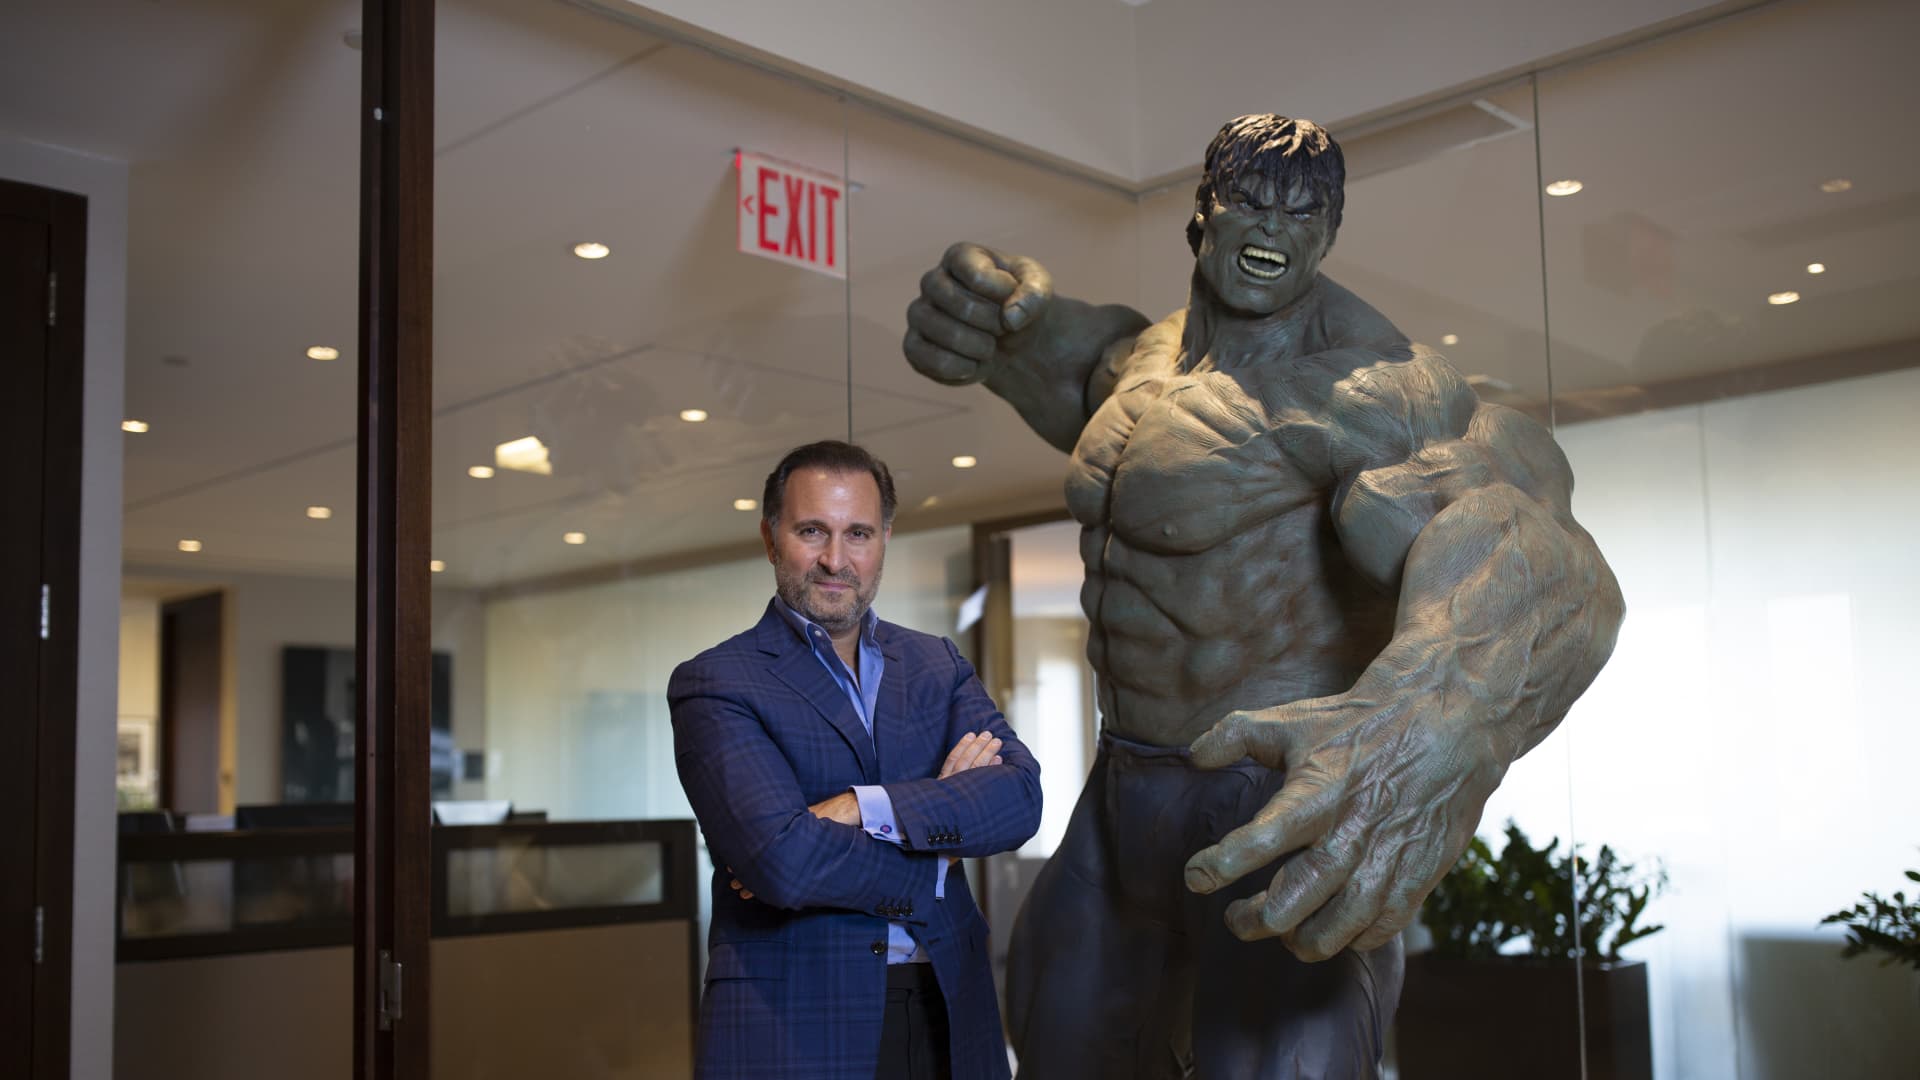 Gerry Cardinale, chief executive officer of Redbird Capital Partners LLC, stands for a photograph next to a 10-foot-tall statue of the Incredible Hulk in New York, U.S., on Wednesday, Nov. 14, 2018.